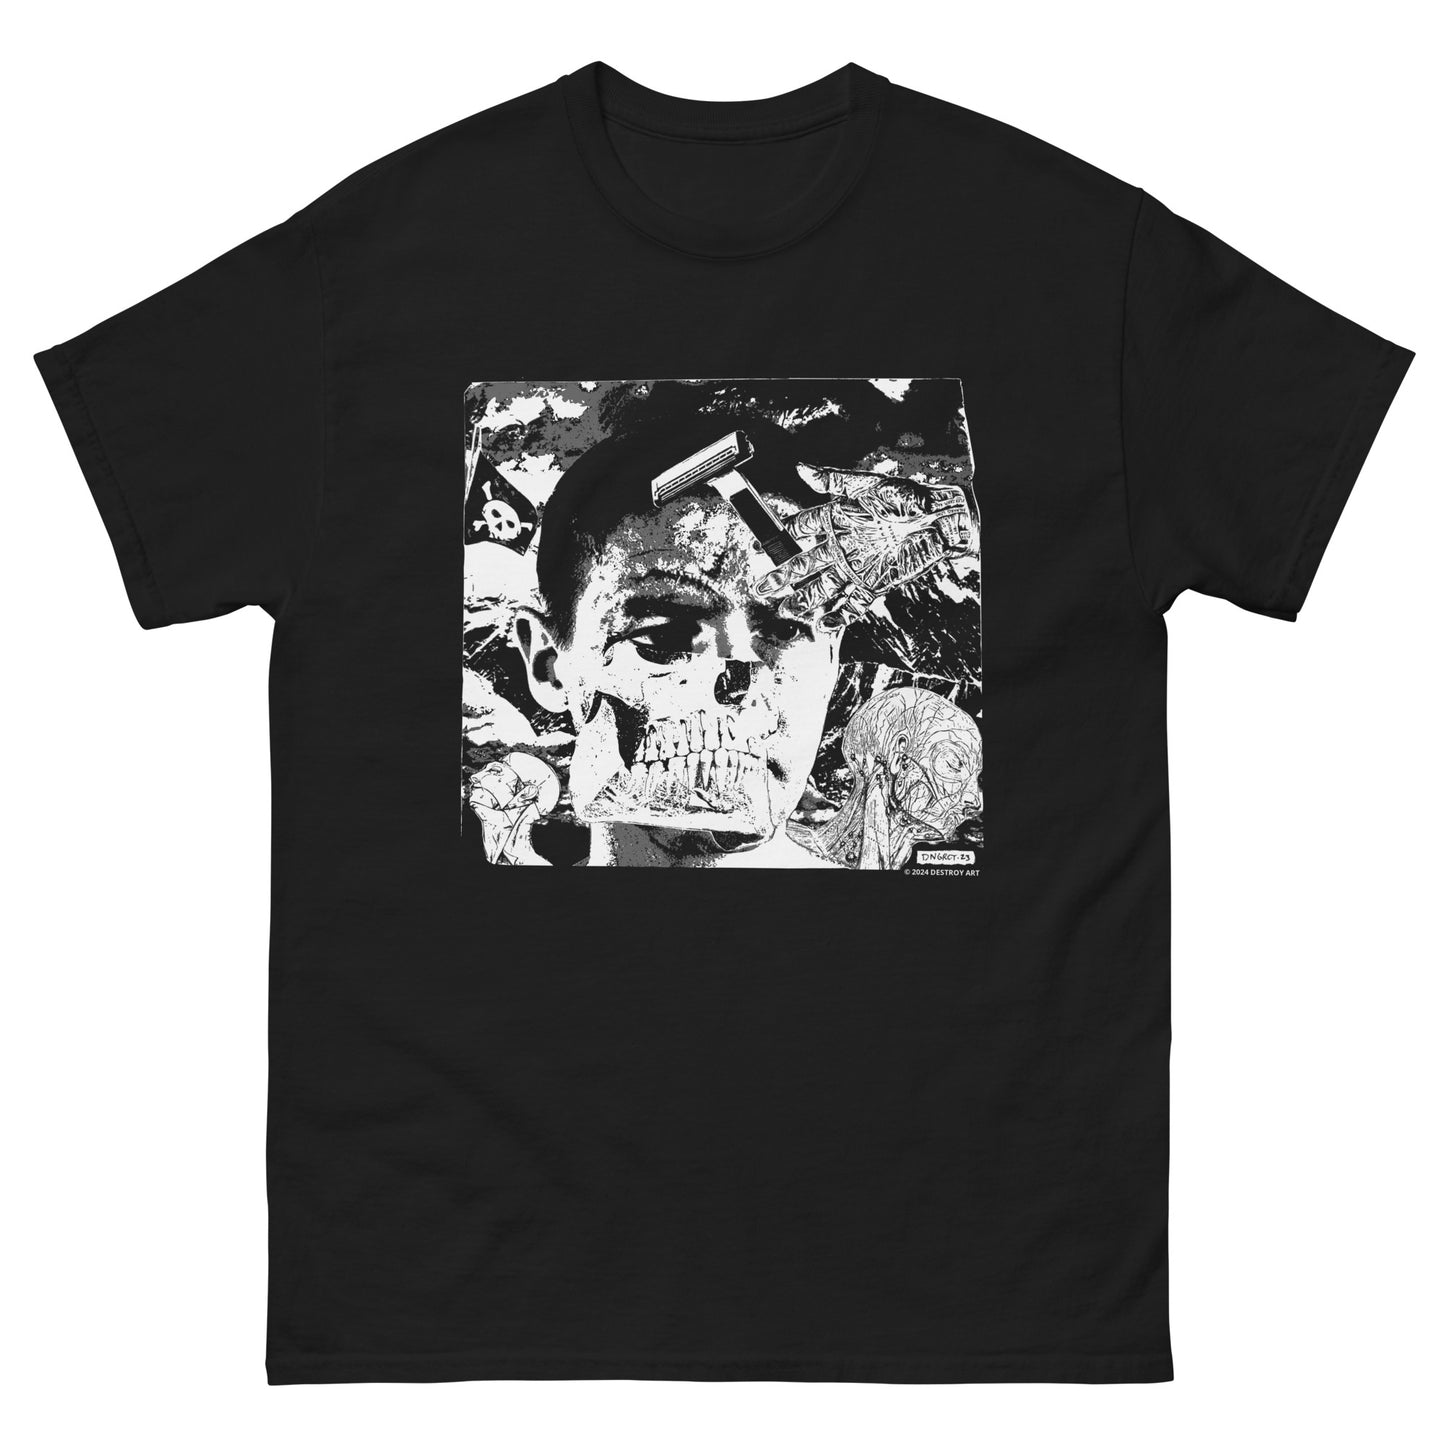 DNGRCT “Don’t Call Me Scarface” Tee